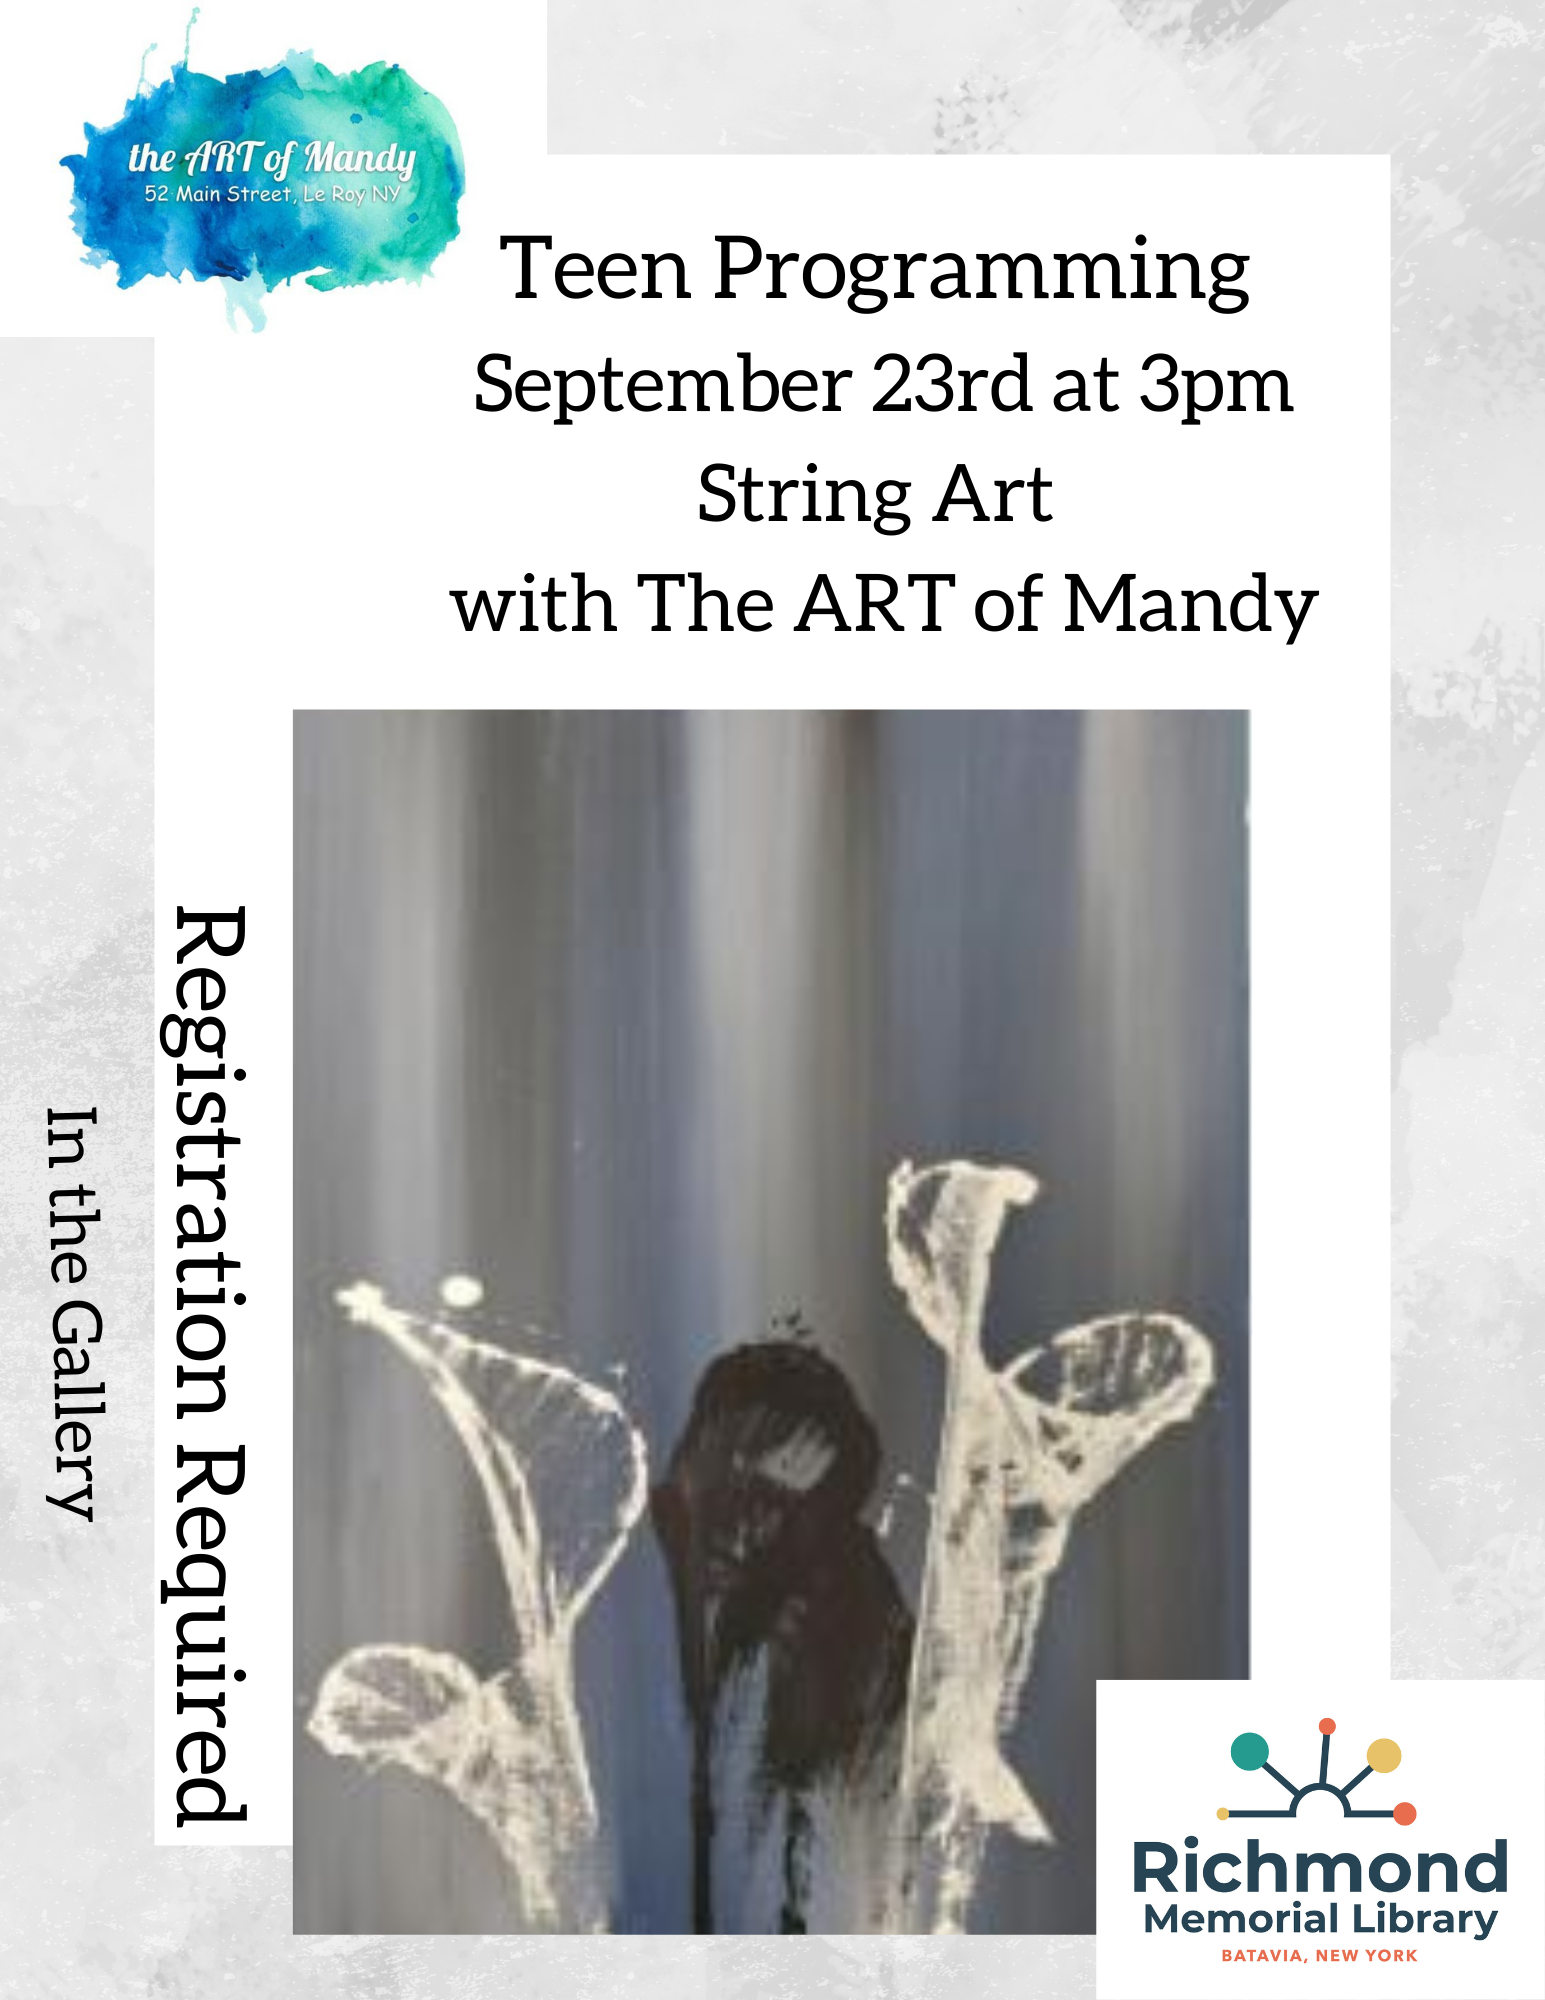 Teen Programming: String Art with the ART of Mandy! 